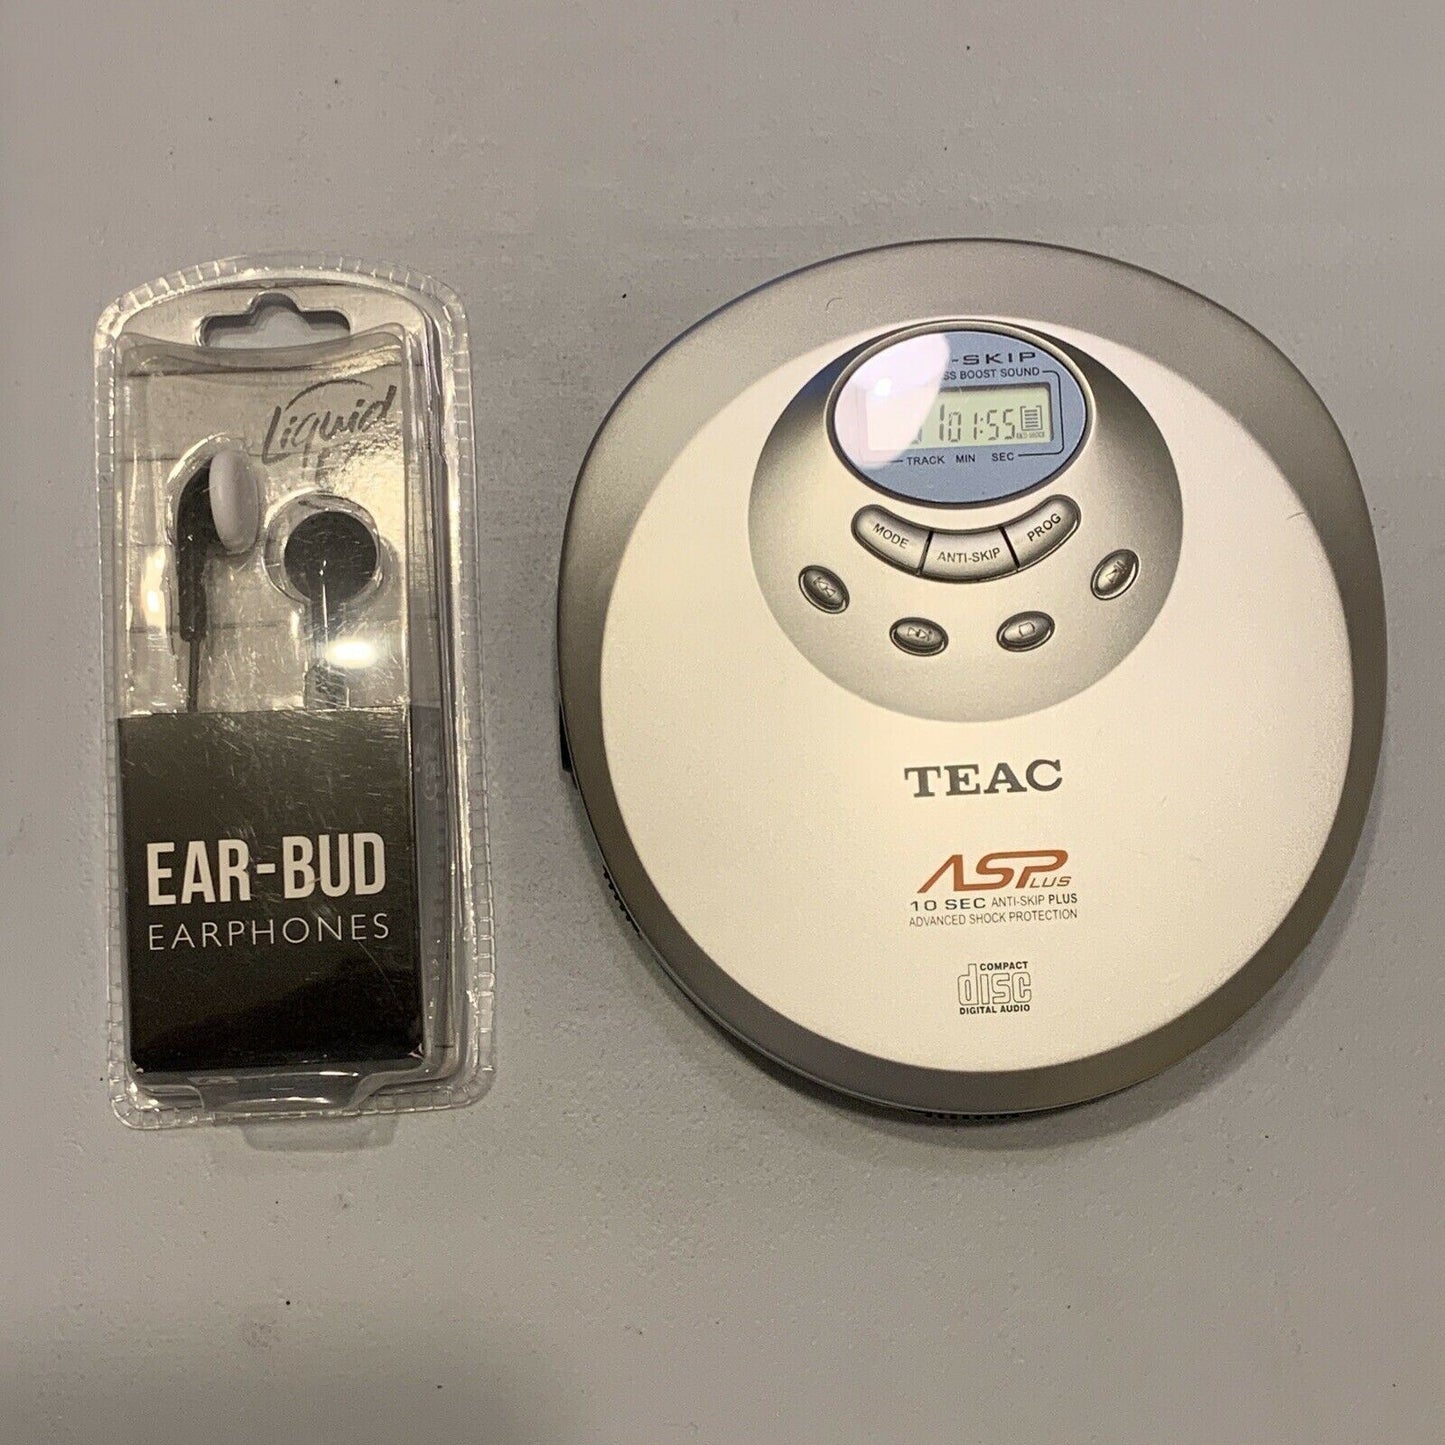 TEAC Portable Personal CD Player Discman PD P219C  with NEW Earphones - TESTED